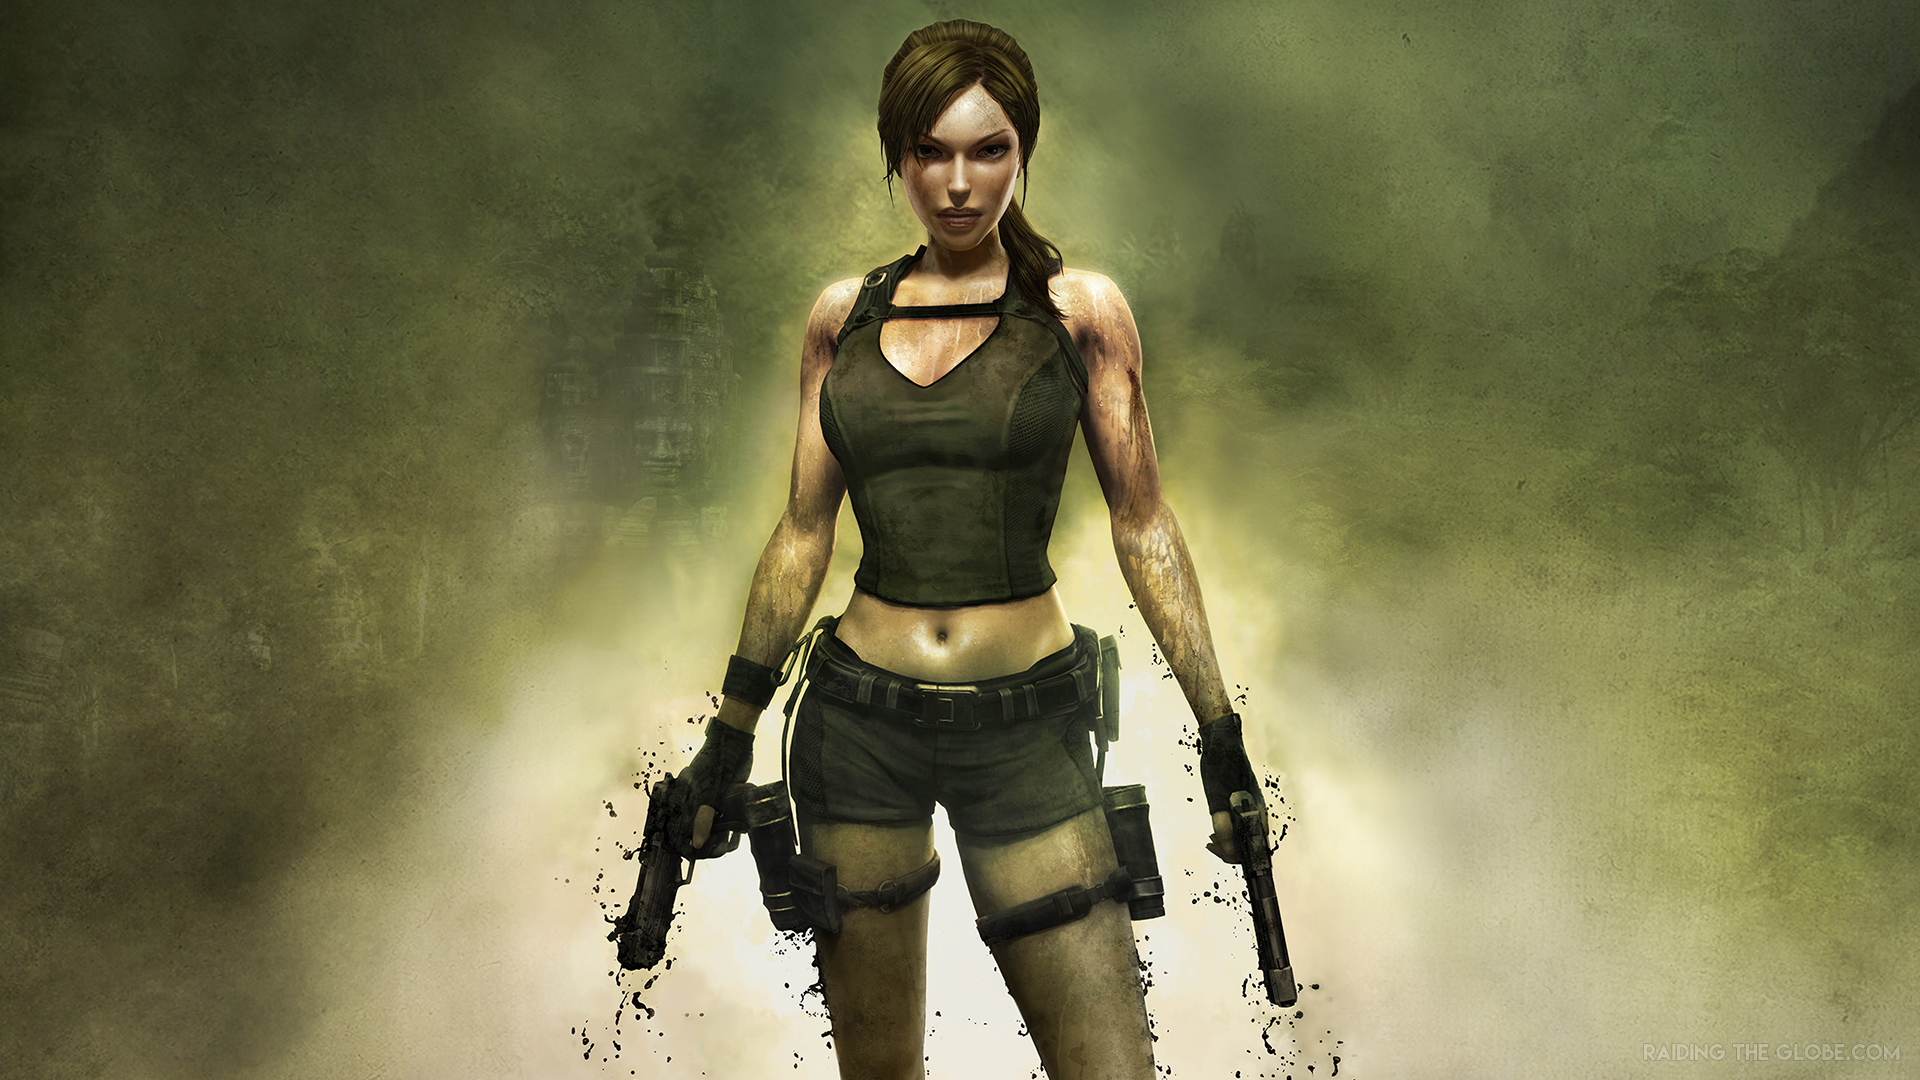 Lara Croft With Bow And Arrow, HD Games, 4k Wallpapers, Images,  Backgrounds, Photos and Pictures